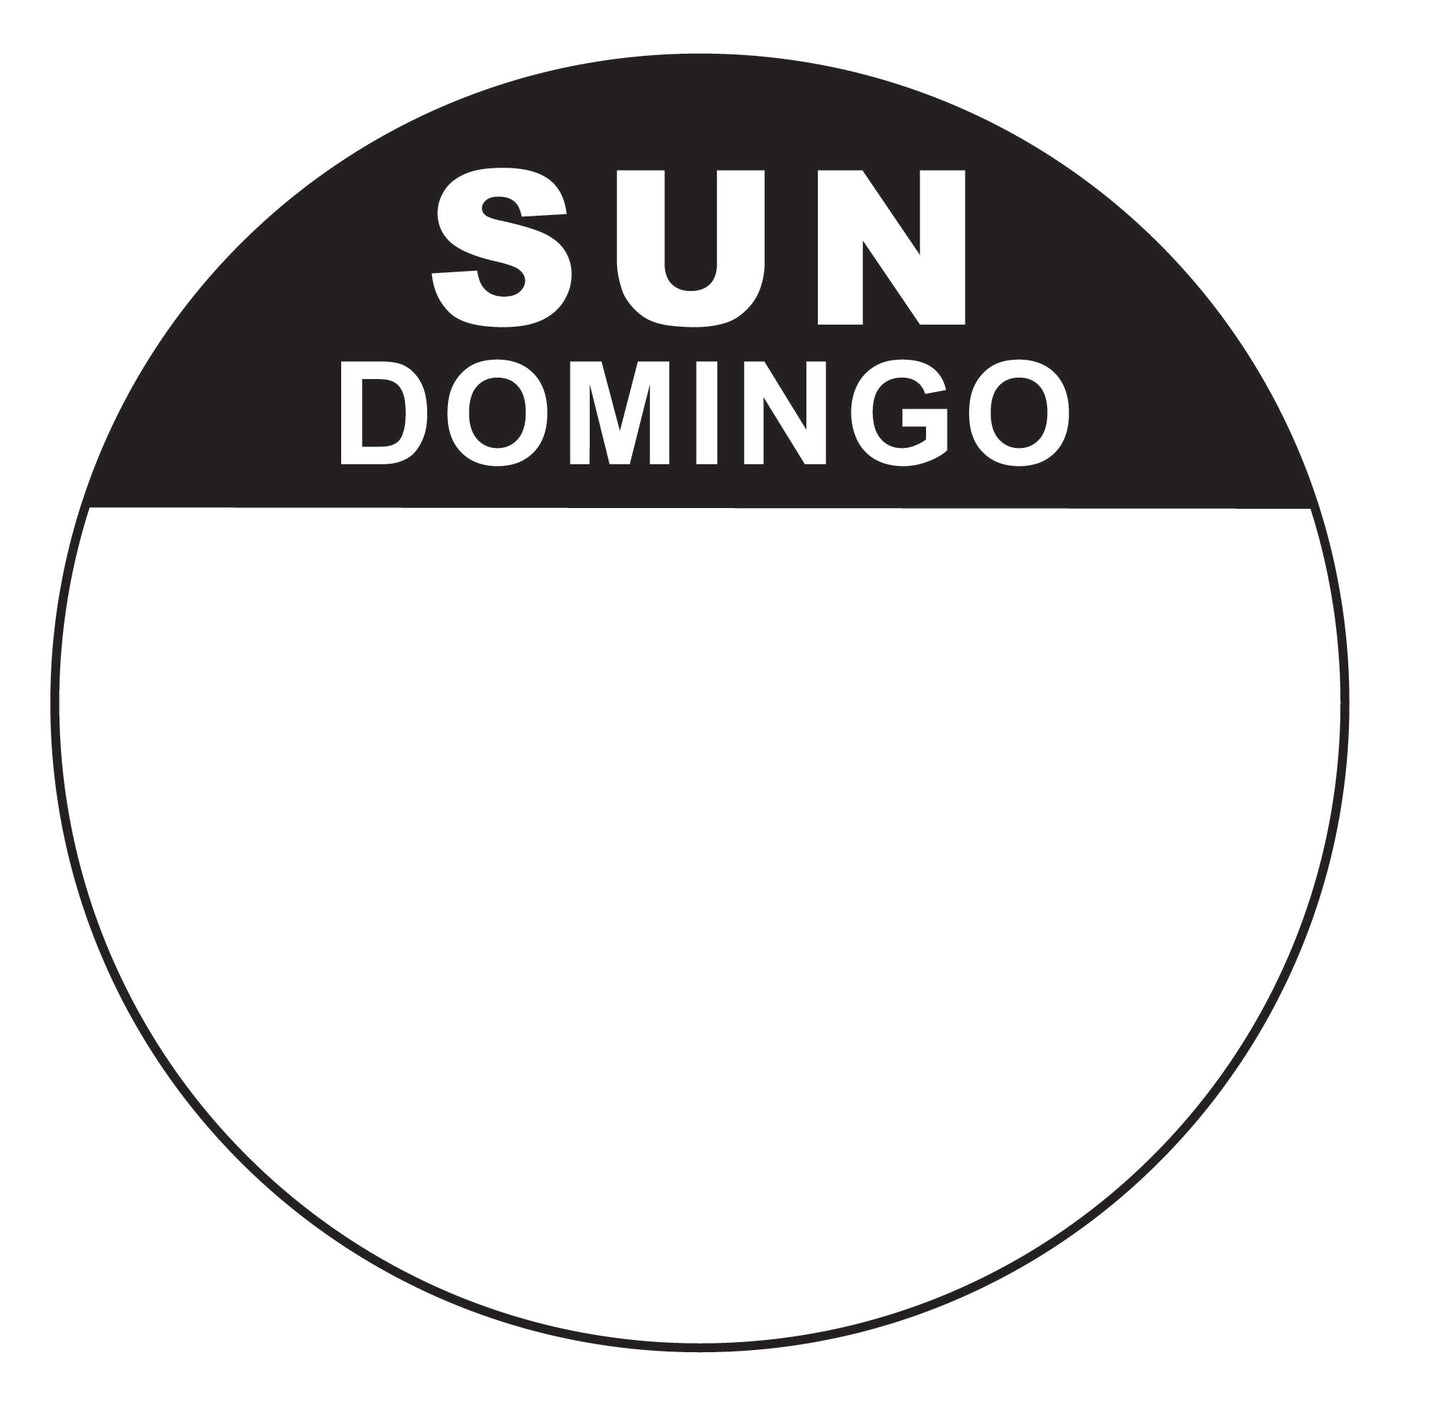 Sunday - Domingo 1.5" Cold Temperature Day of the Week Date Label